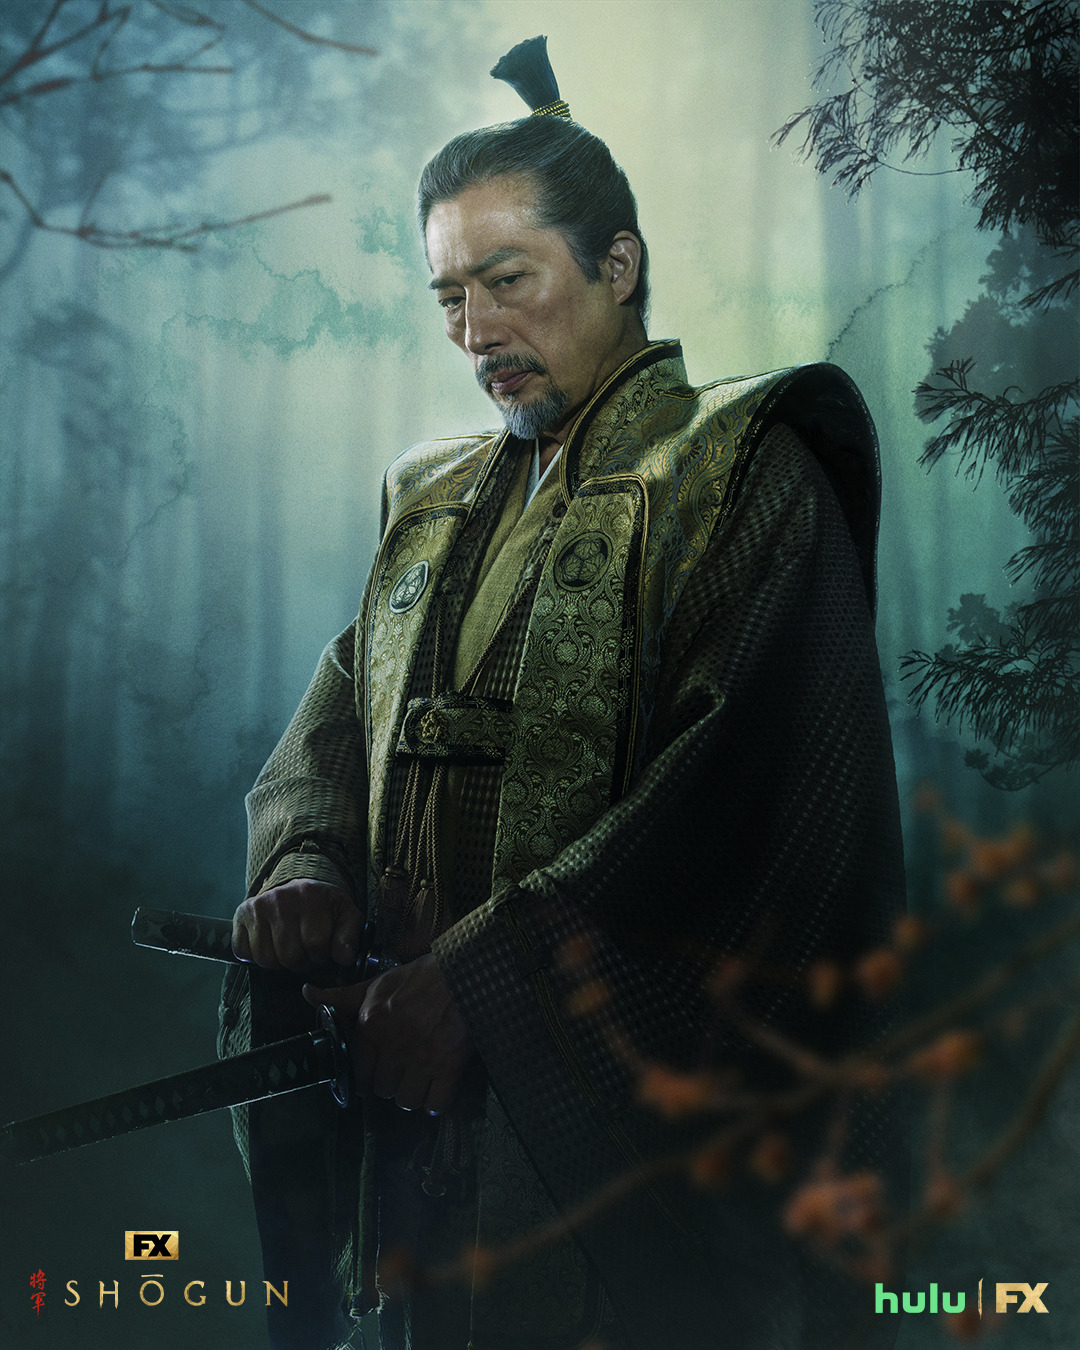 Extra Large TV Poster Image for Shogun (#15 of 24)